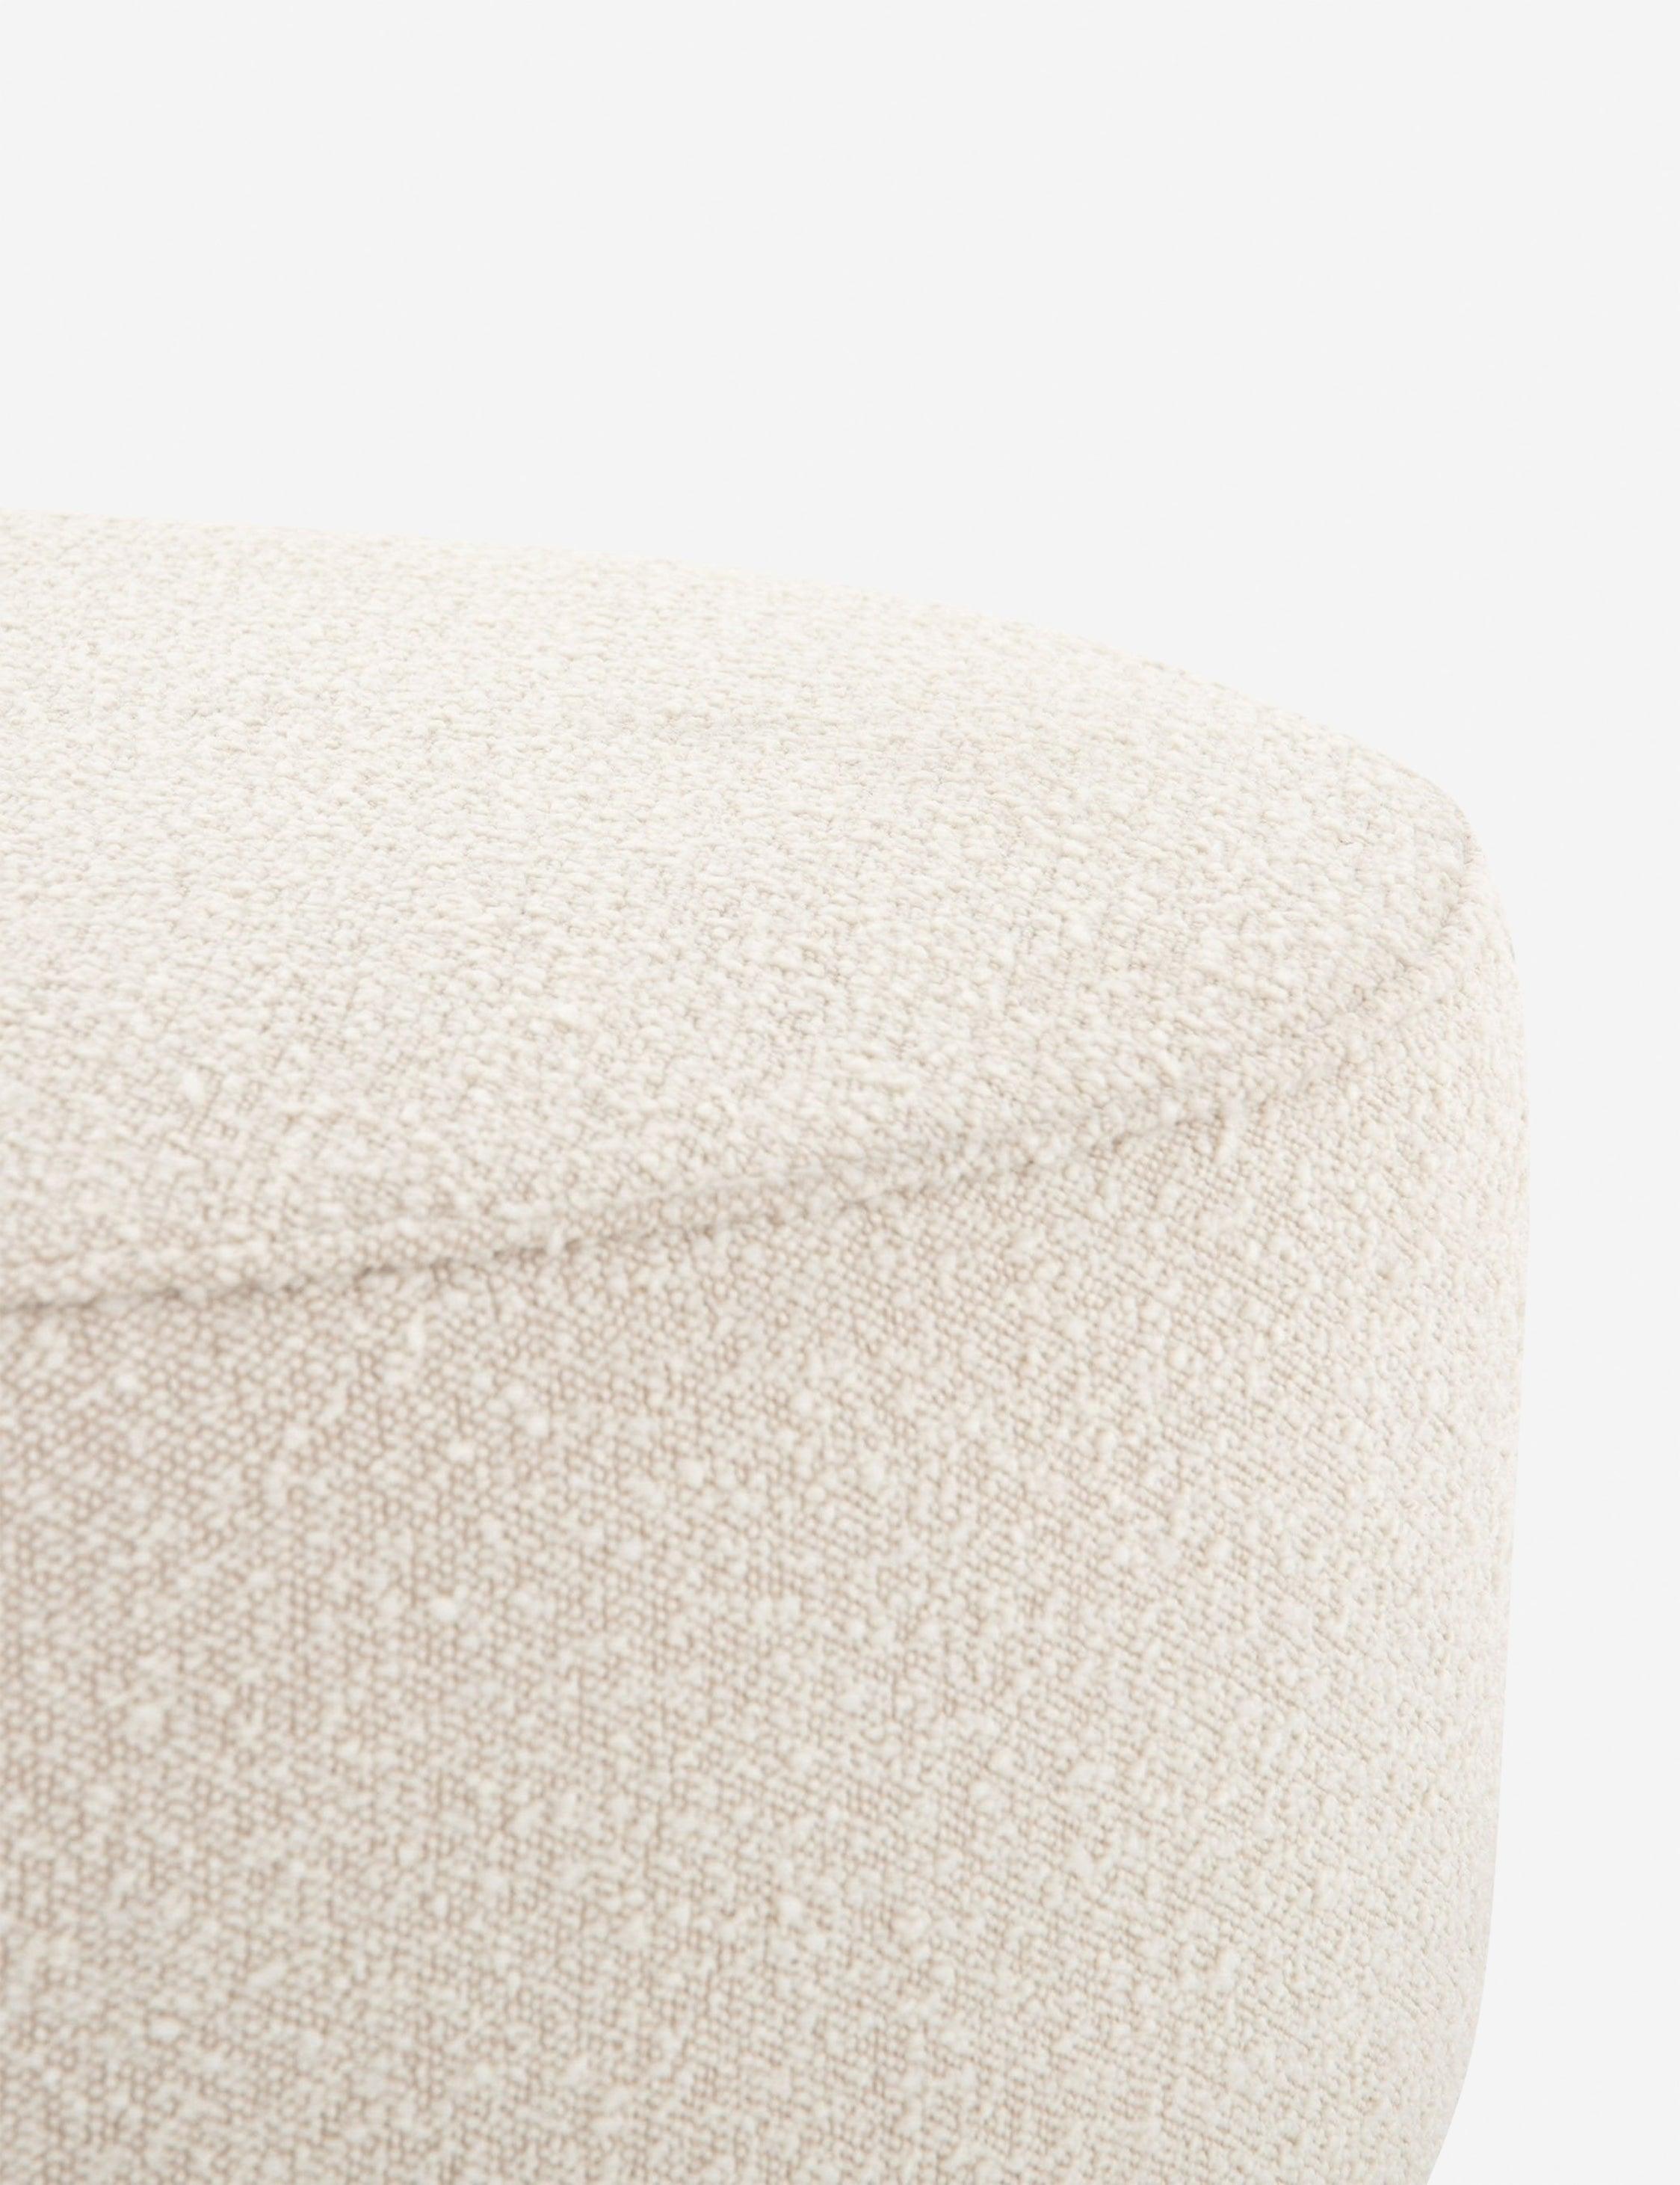 Sinclair 36" Cream Round Ottoman with Distressed Natural Base